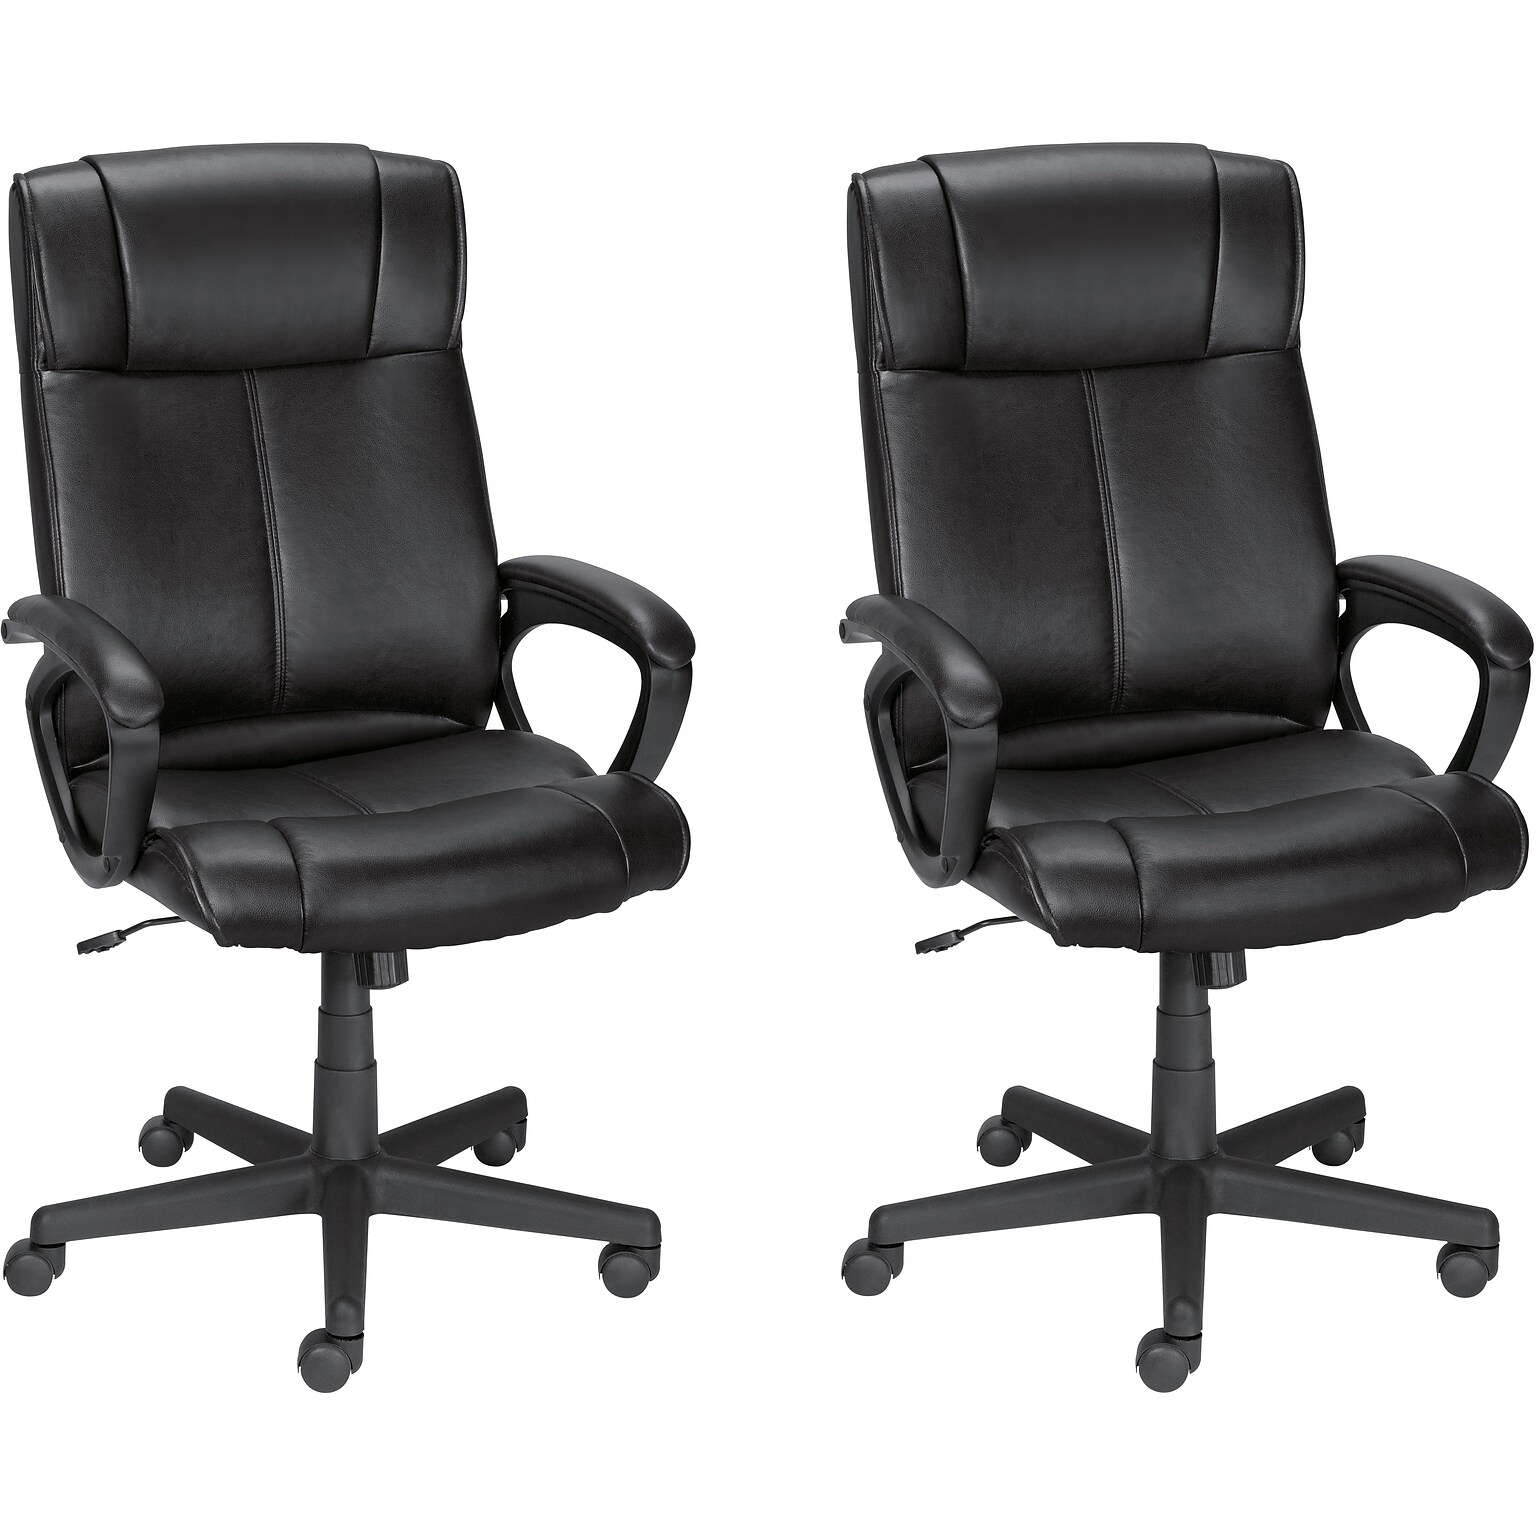 Buy 1 Get 1 FREE Quill Brand® Turcotte Luxura High-Back Manager Chair, Black